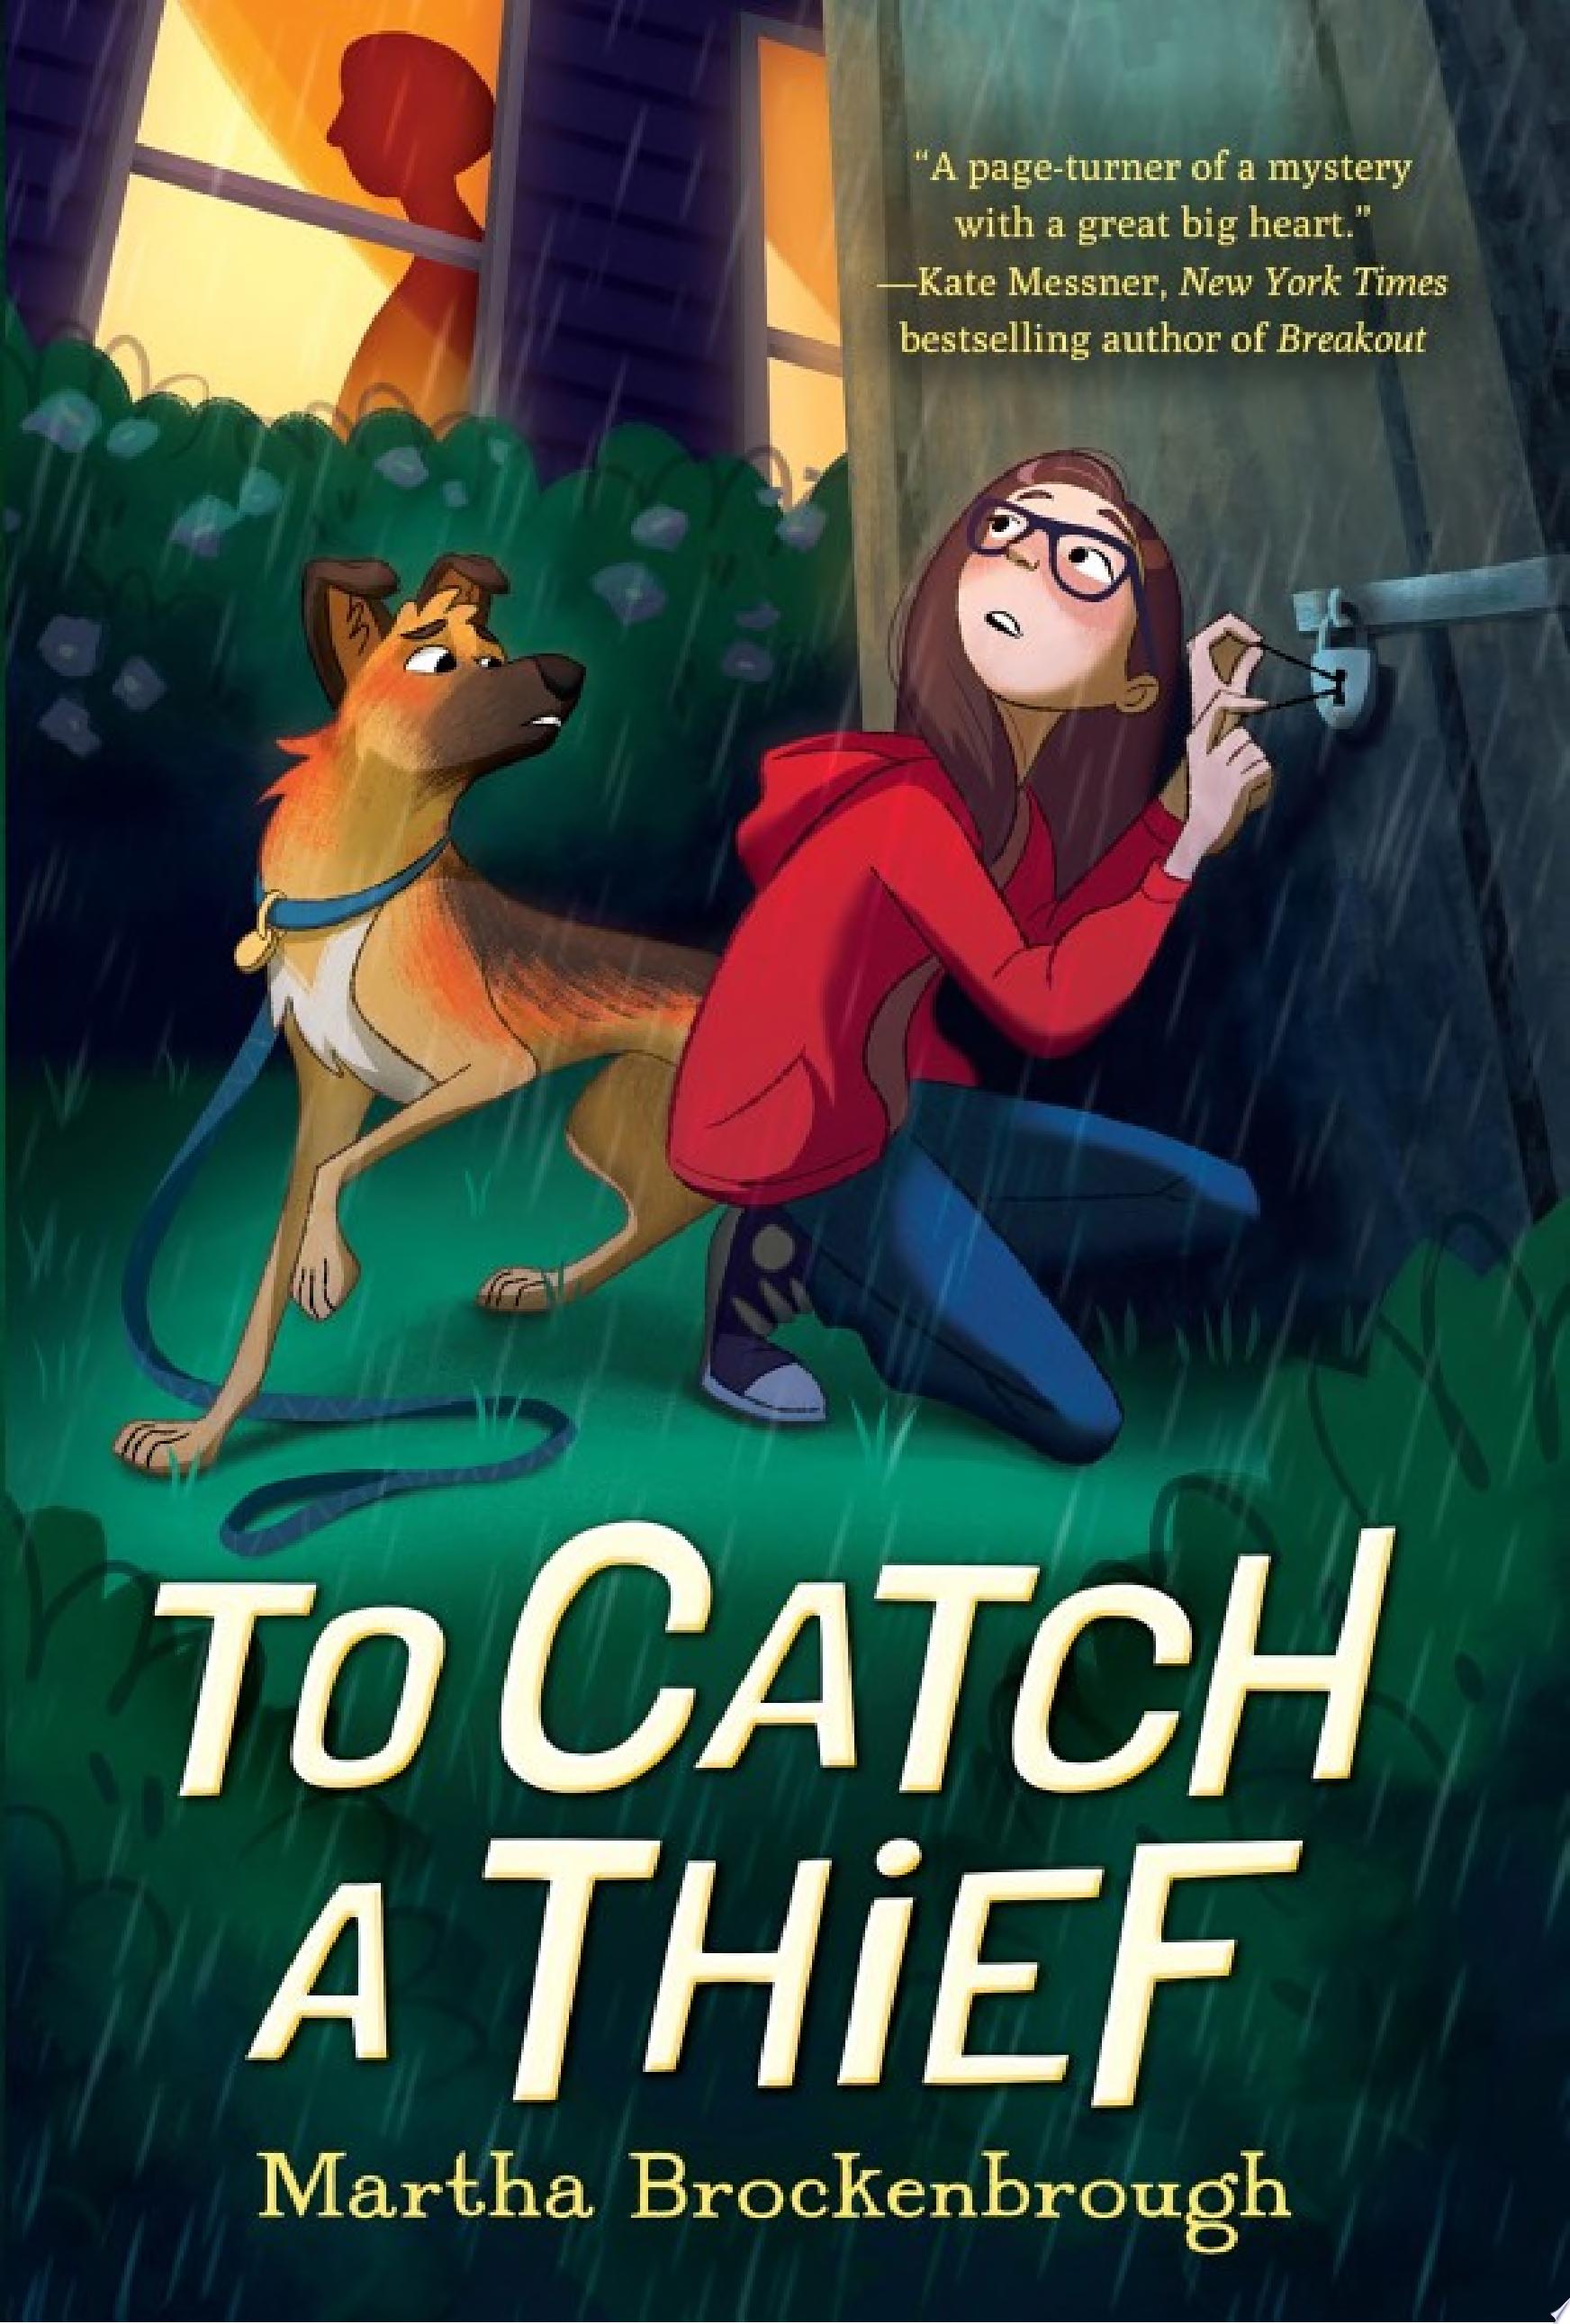 Image for "To Catch a Thief"